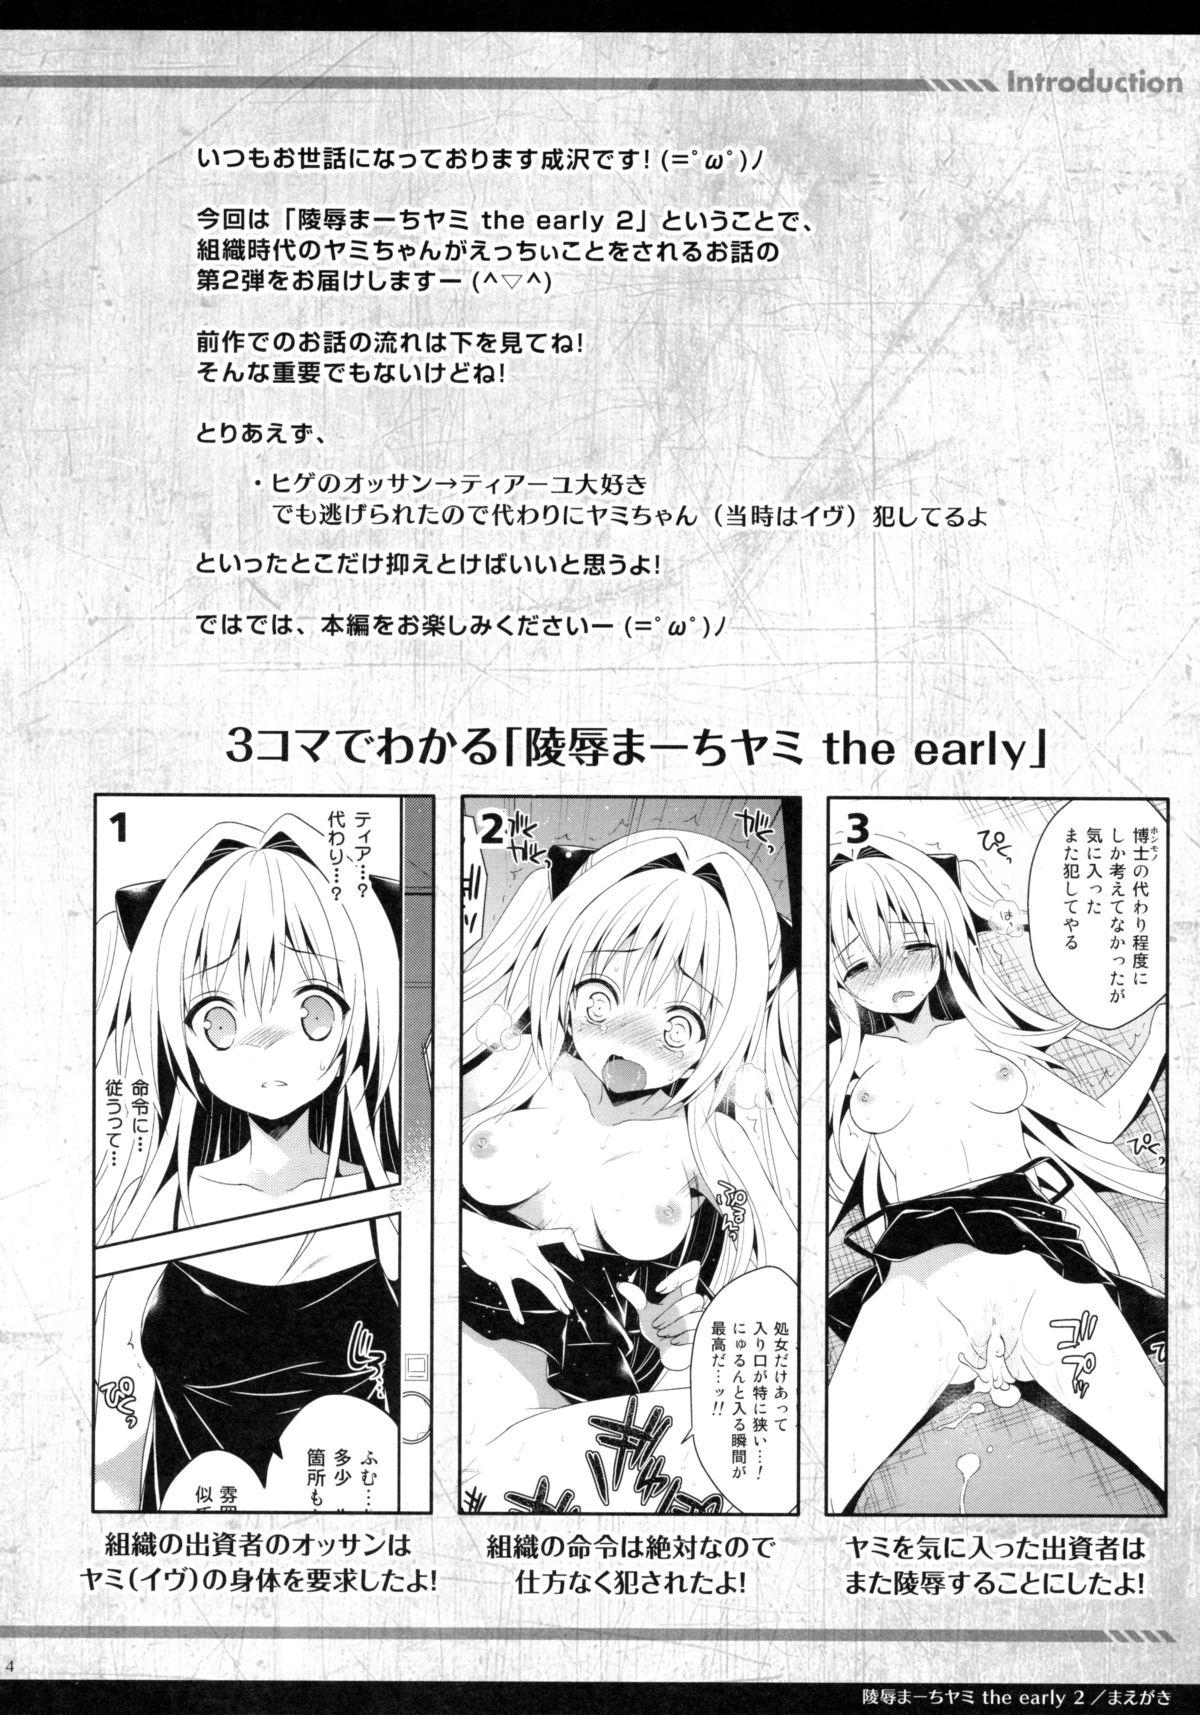 Joven Ryoujoku March Yami the early 2 - To love-ru Game - Page 4